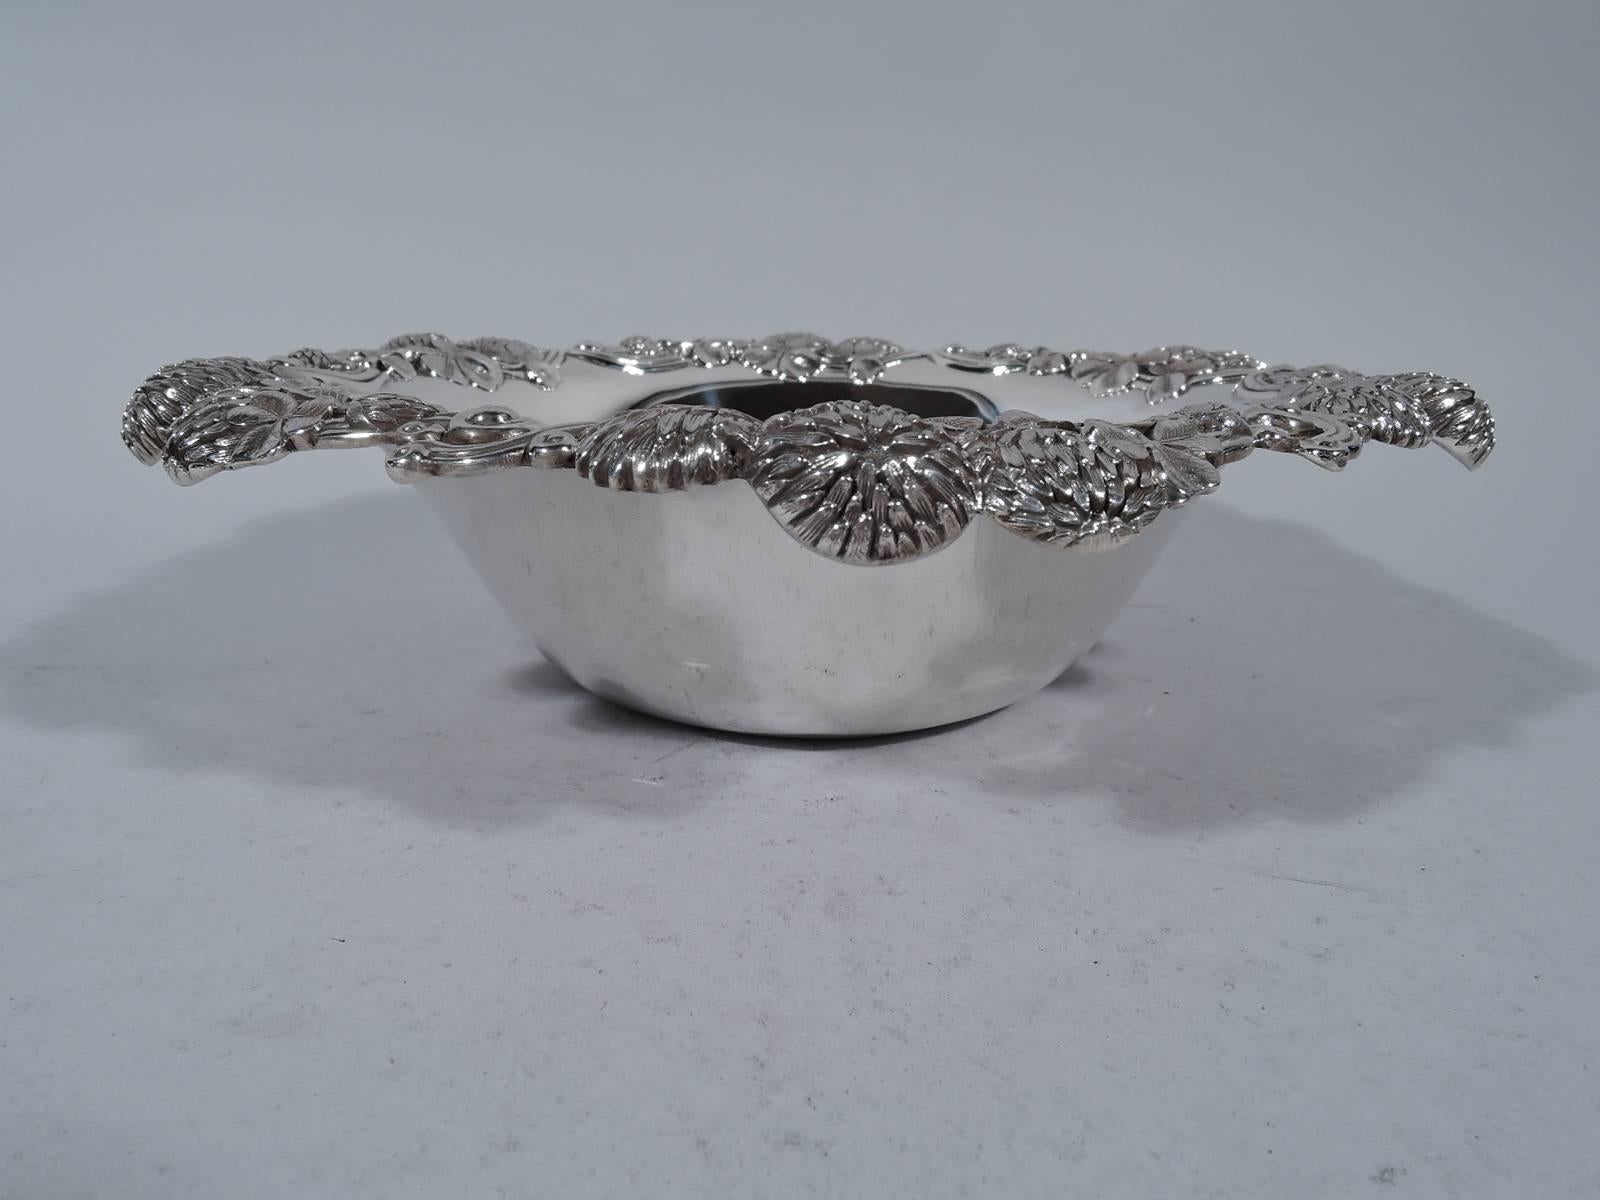 Sterling silver bowl in clover pattern. Made by Tiffany & Co. in New York, circa 1898. Tapering sides and turned-down rim with bunched blossoms. An early piece in this pattern. Hallmark includes pattern no. 13780 (first produced in 1898) and